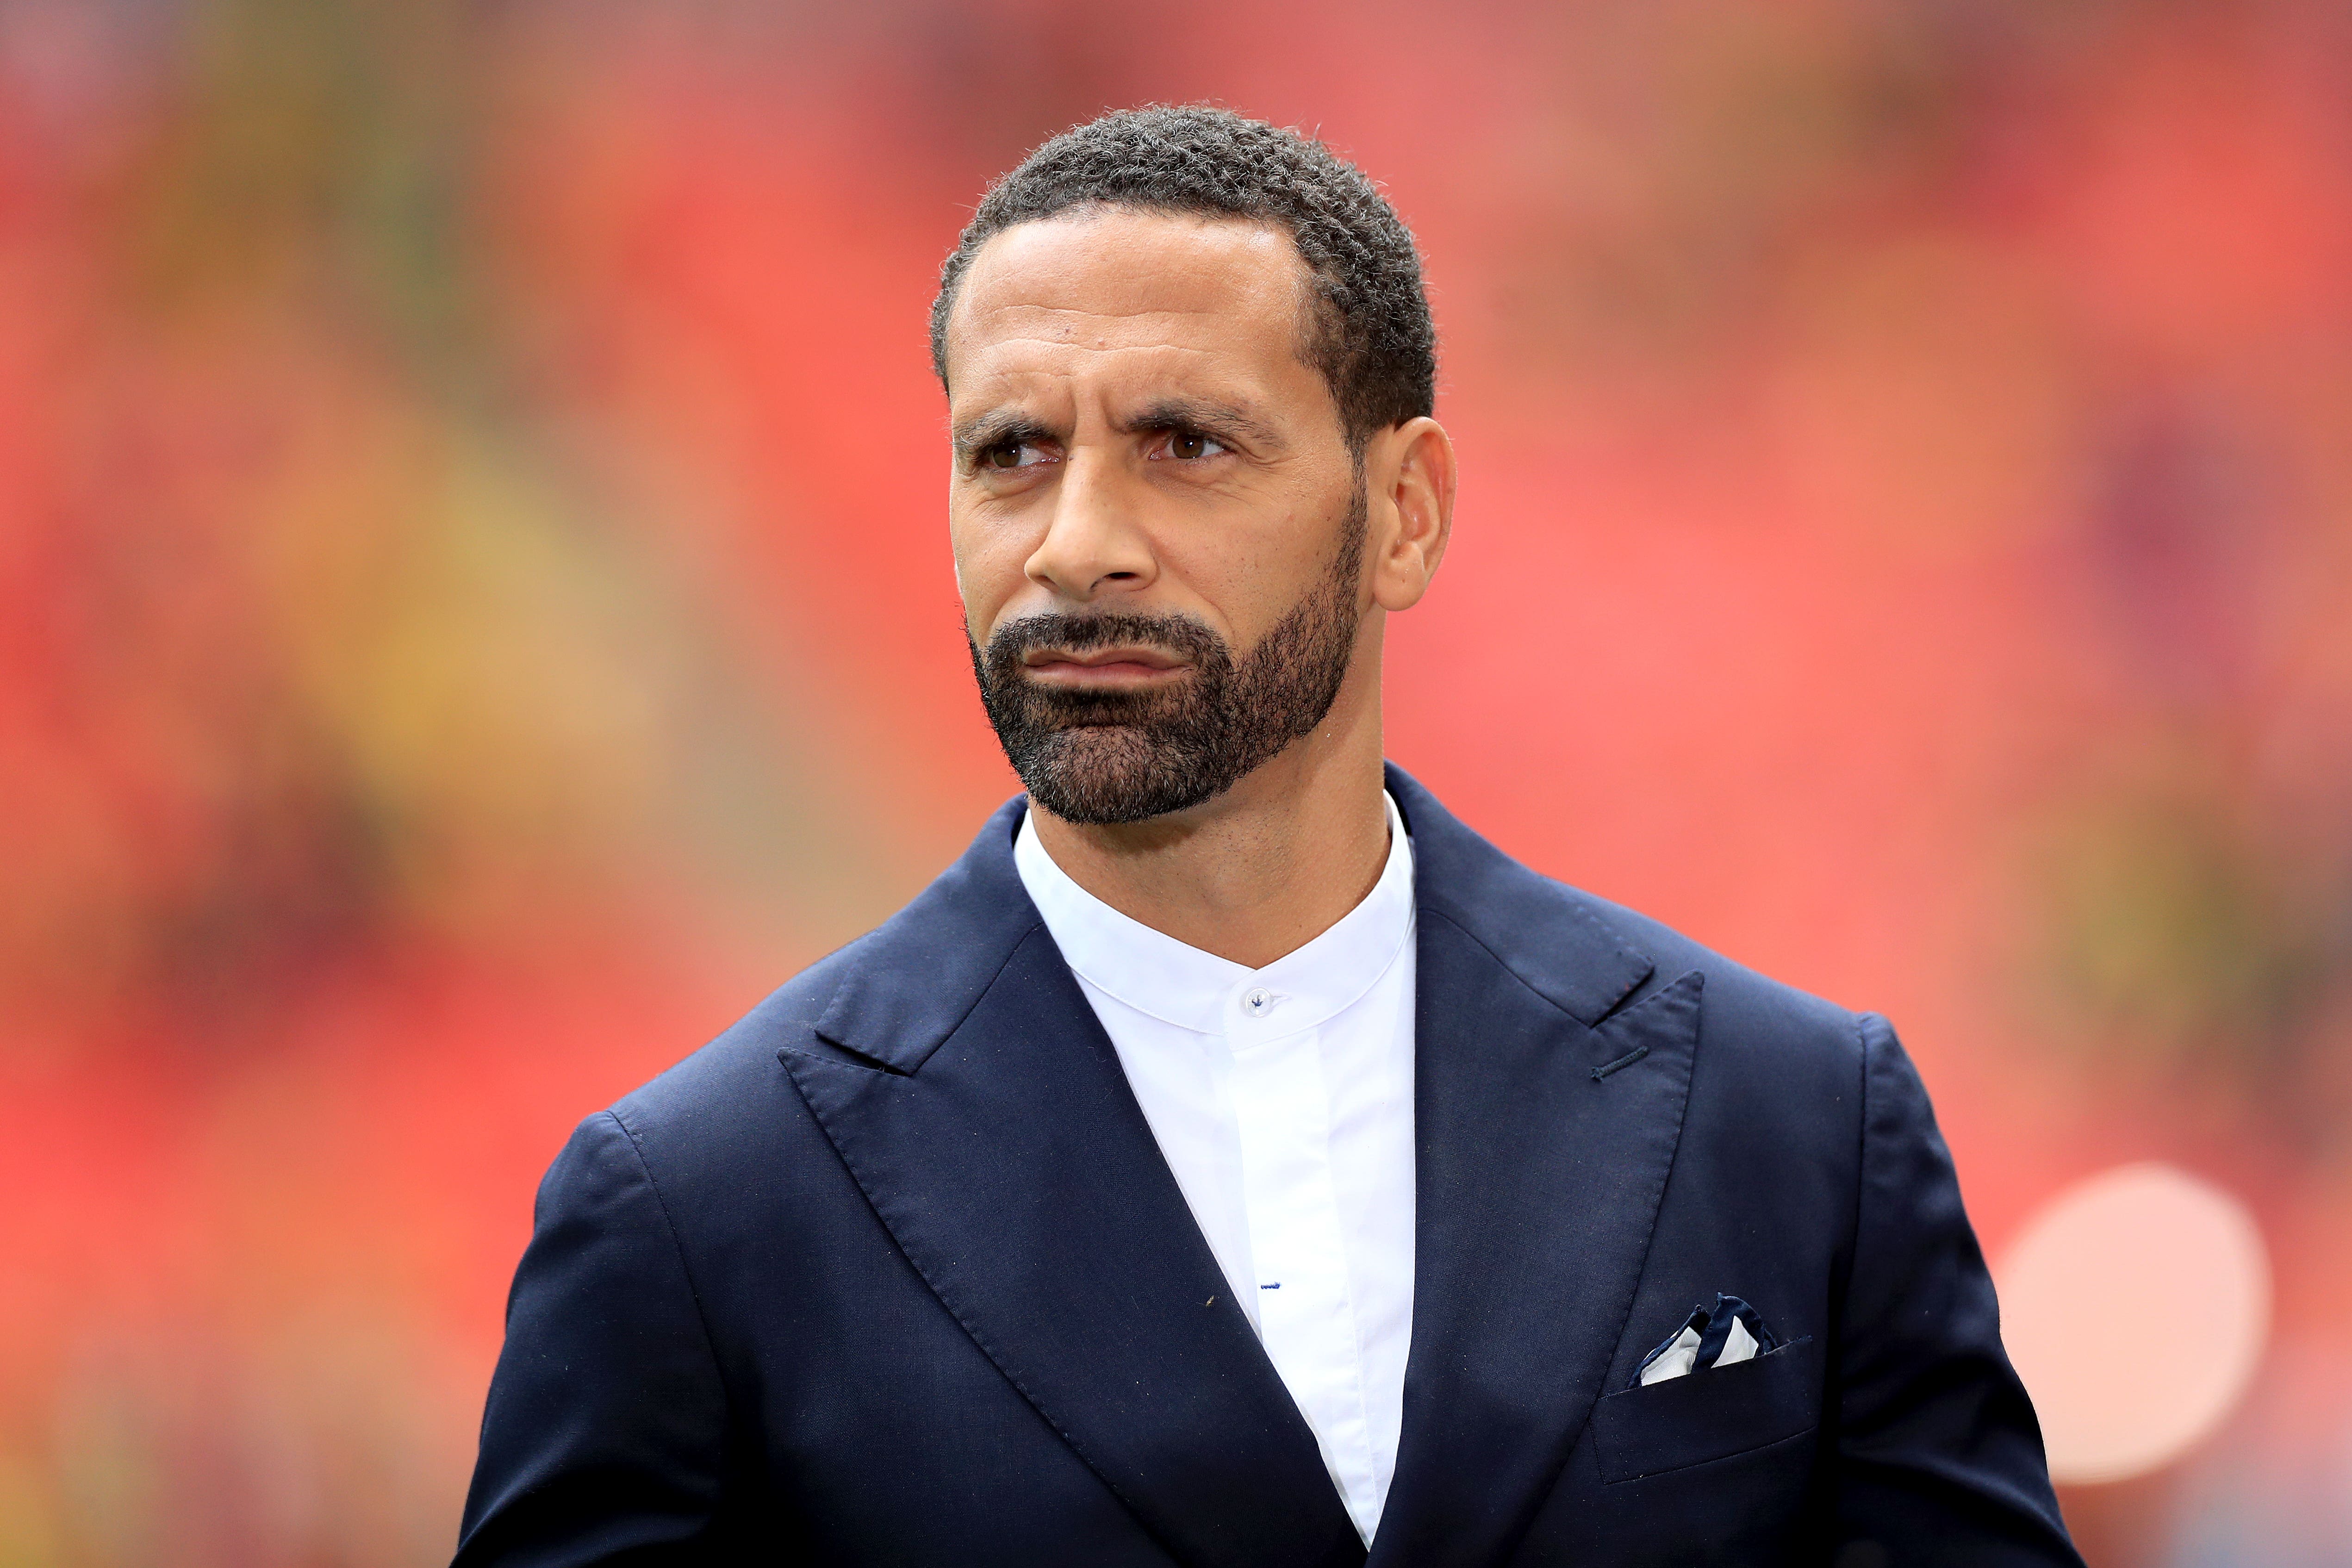 Former England footballer Rio Ferdinand to be made an OBE | The Independent